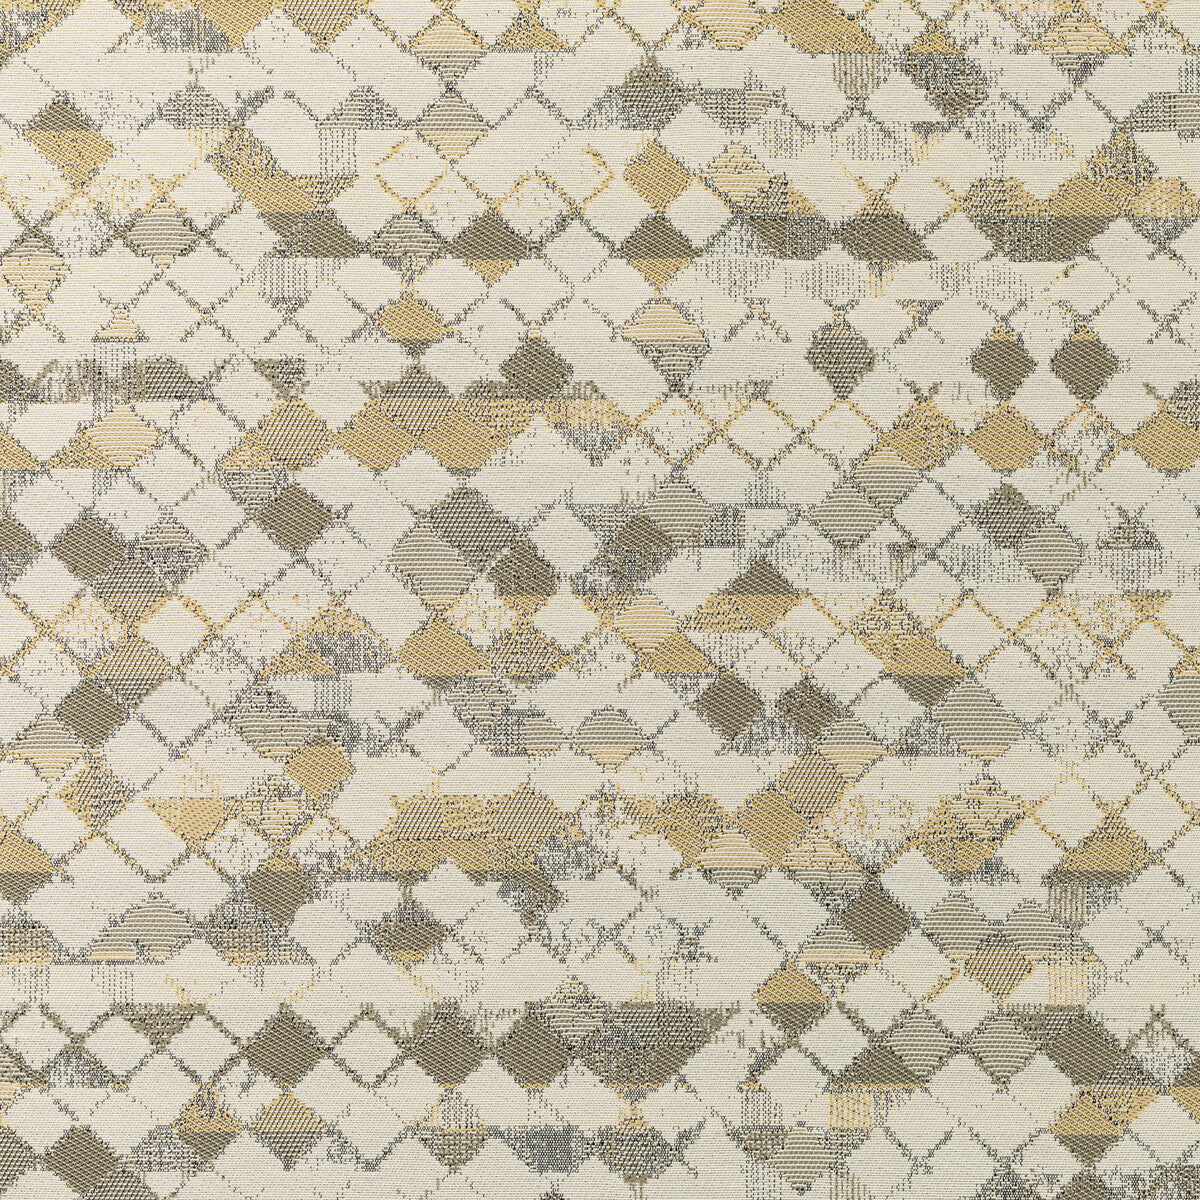 Light Point fabric in pebble color - pattern 36267.1611.0 - by Kravet Contract in the Gis Crypton collection